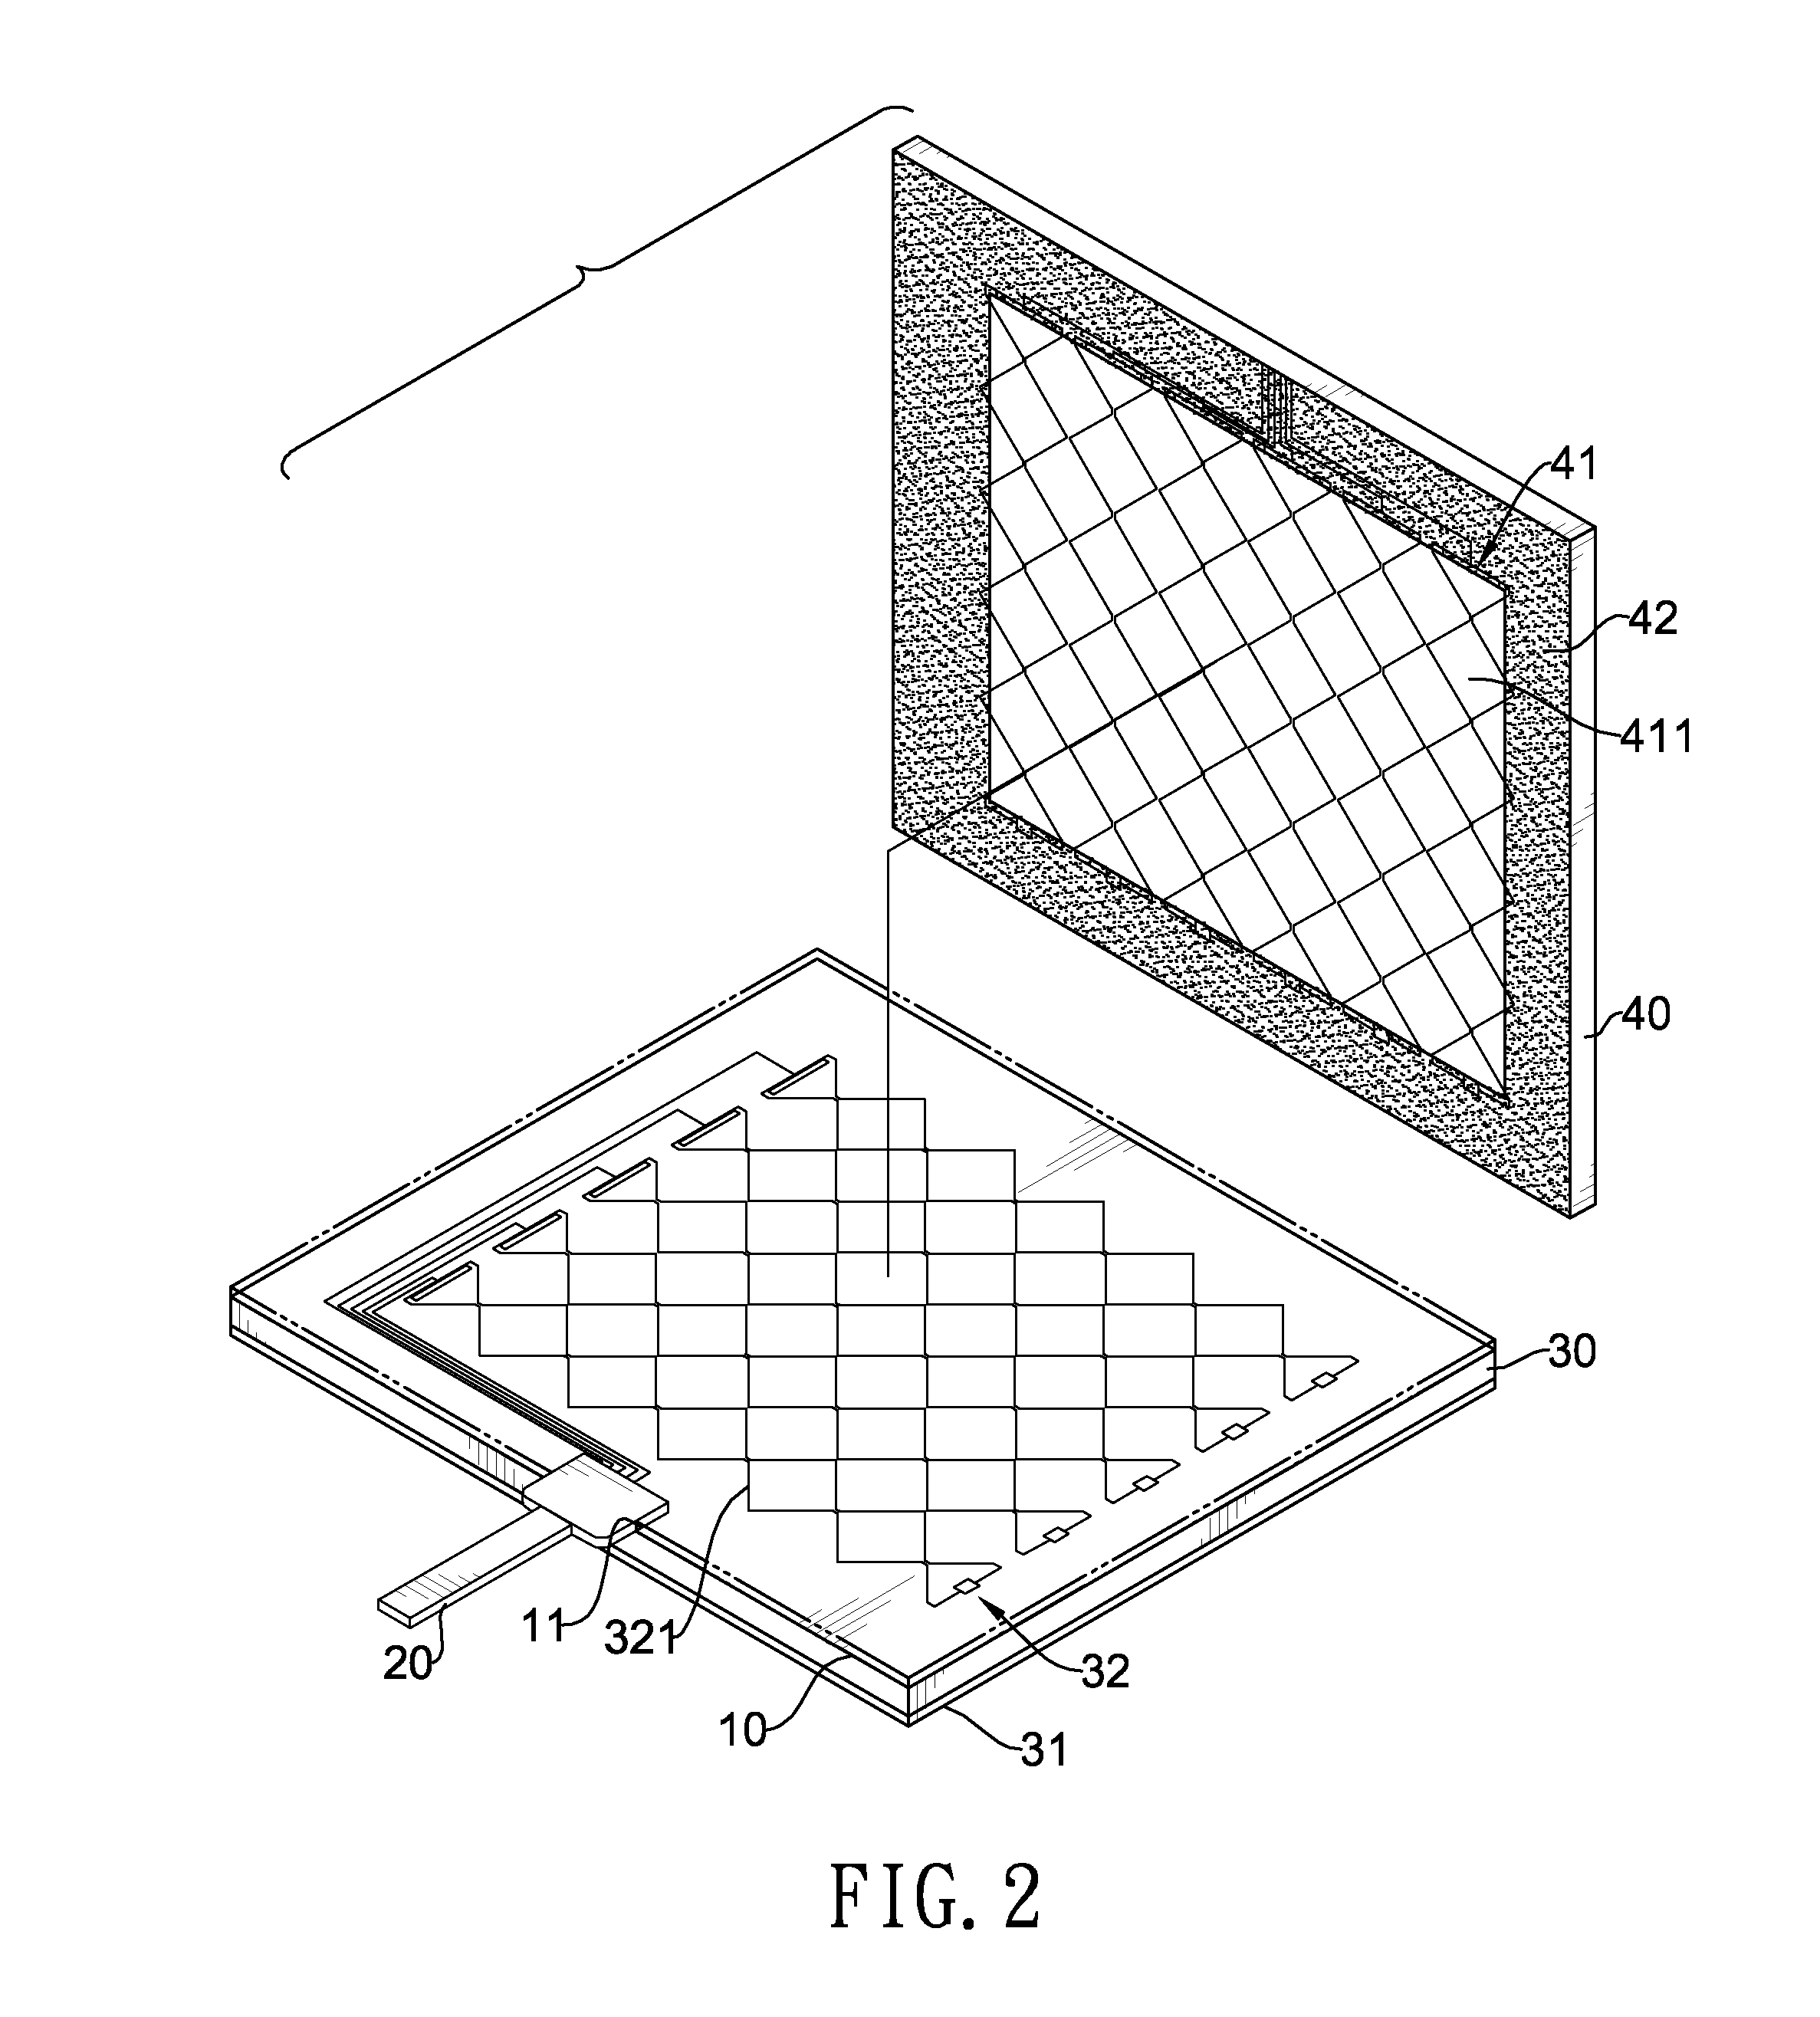 Projected capacitive touch panel